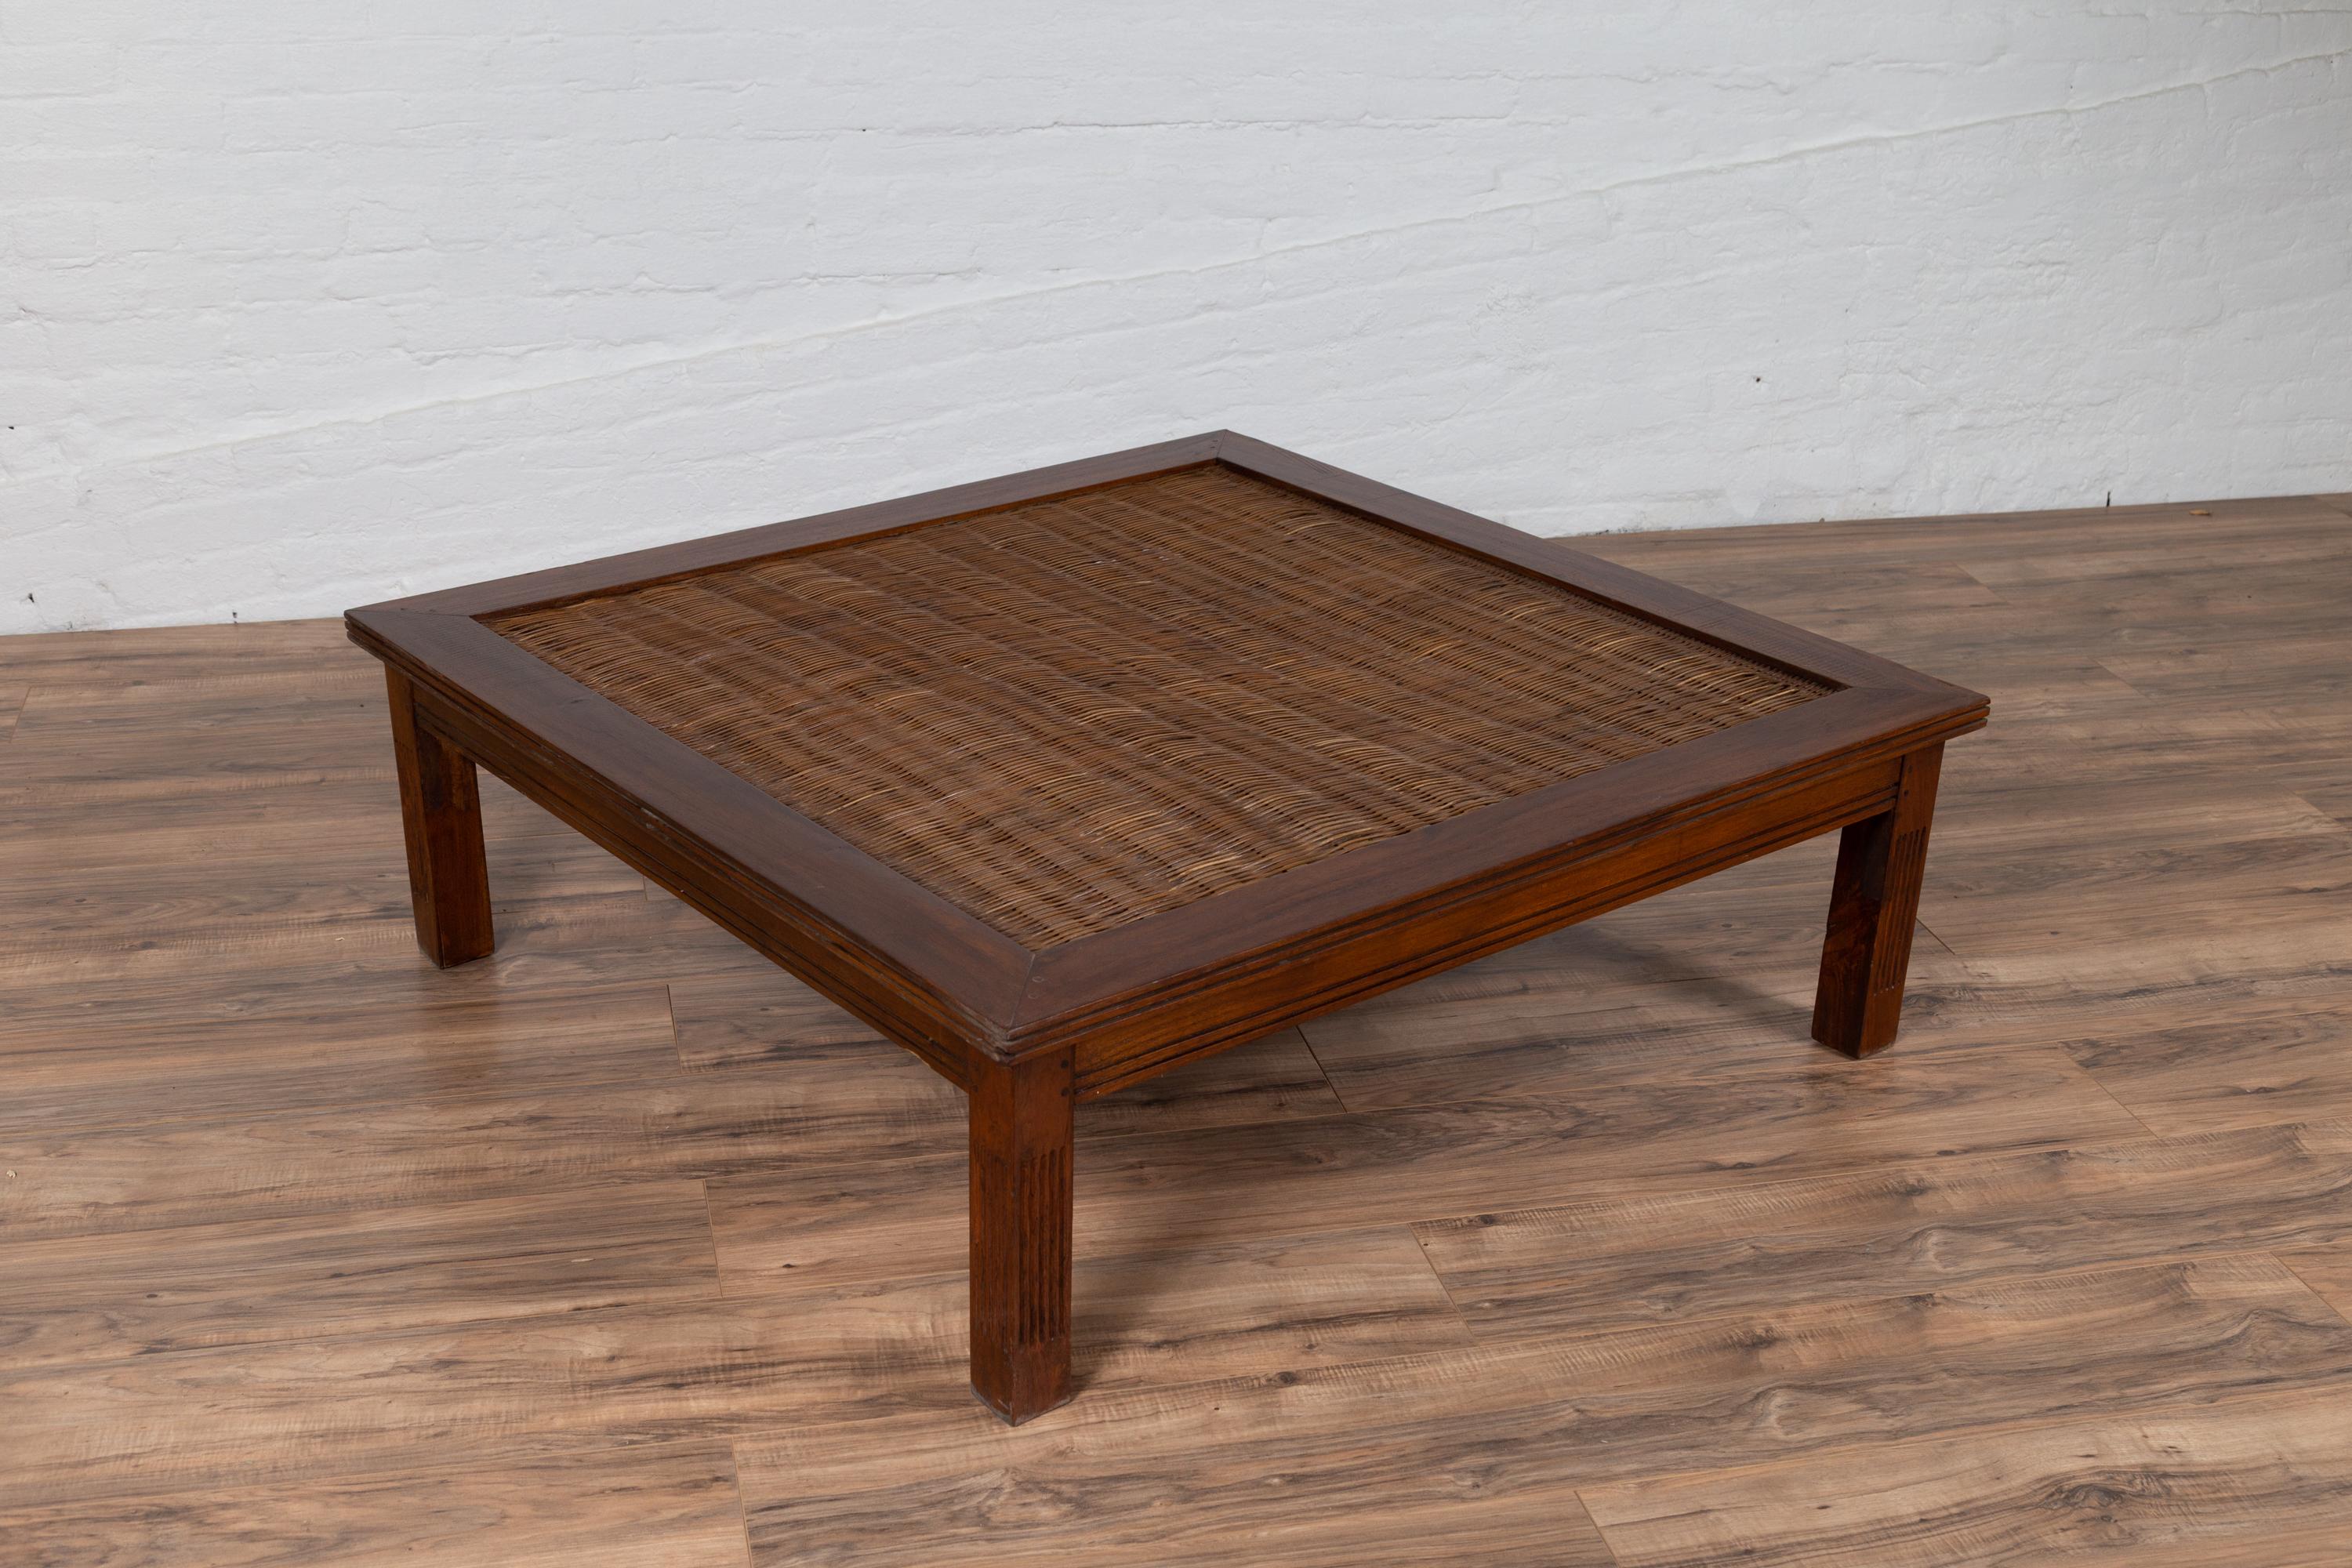 Antique Chinese Square-Shaped Elm Coffee Table with Rattan Inset and Fluted Legs 1